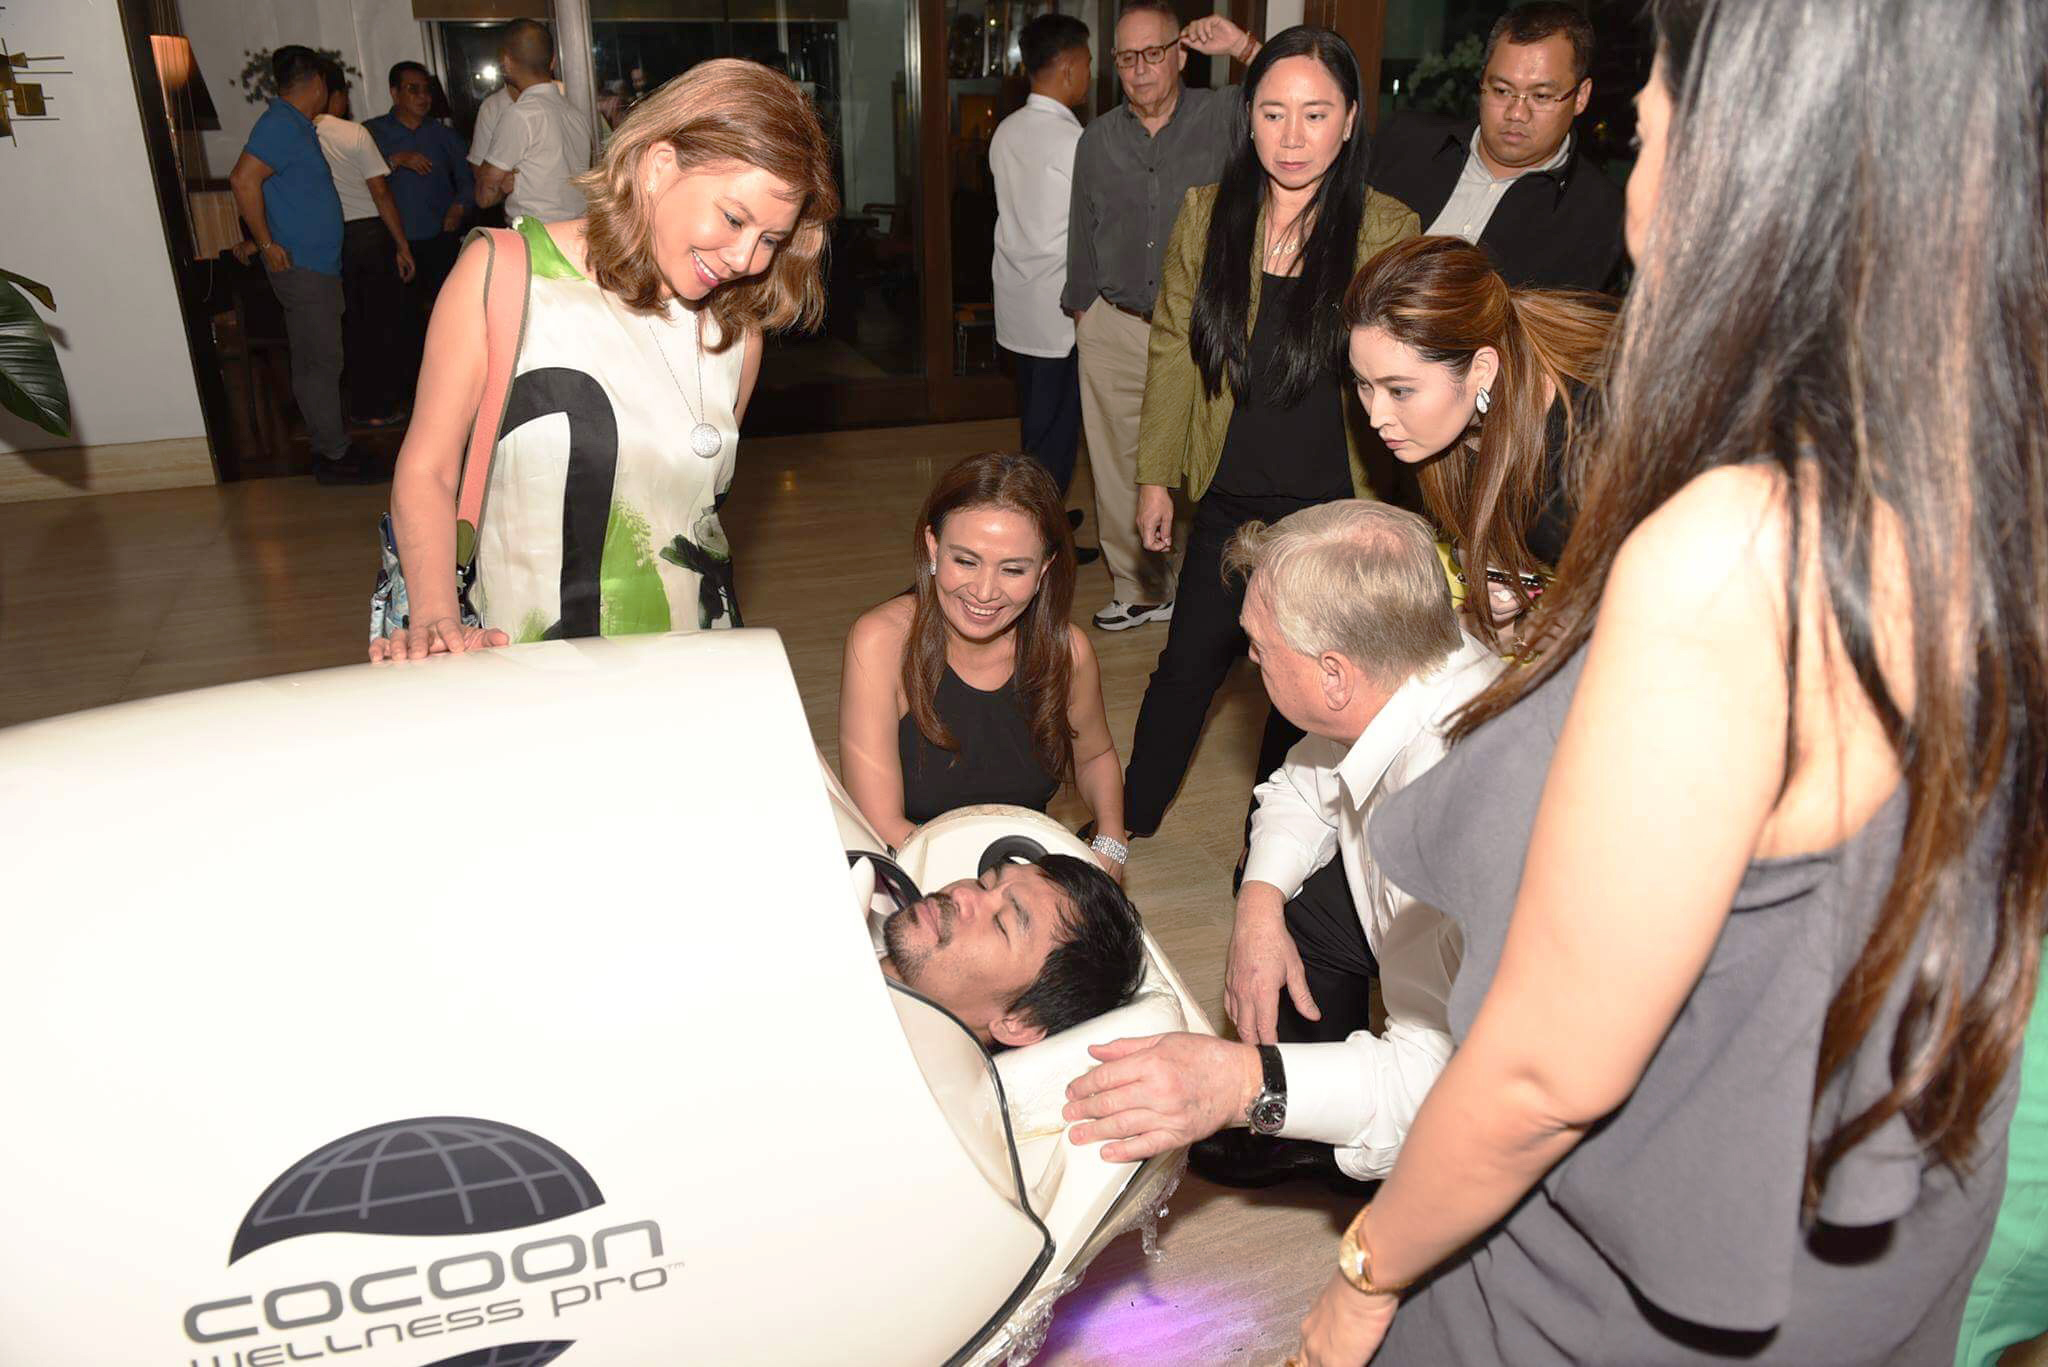 Manny Pacquiao demonstrates fitness programs in the Cocoon Wellness Pro Pod